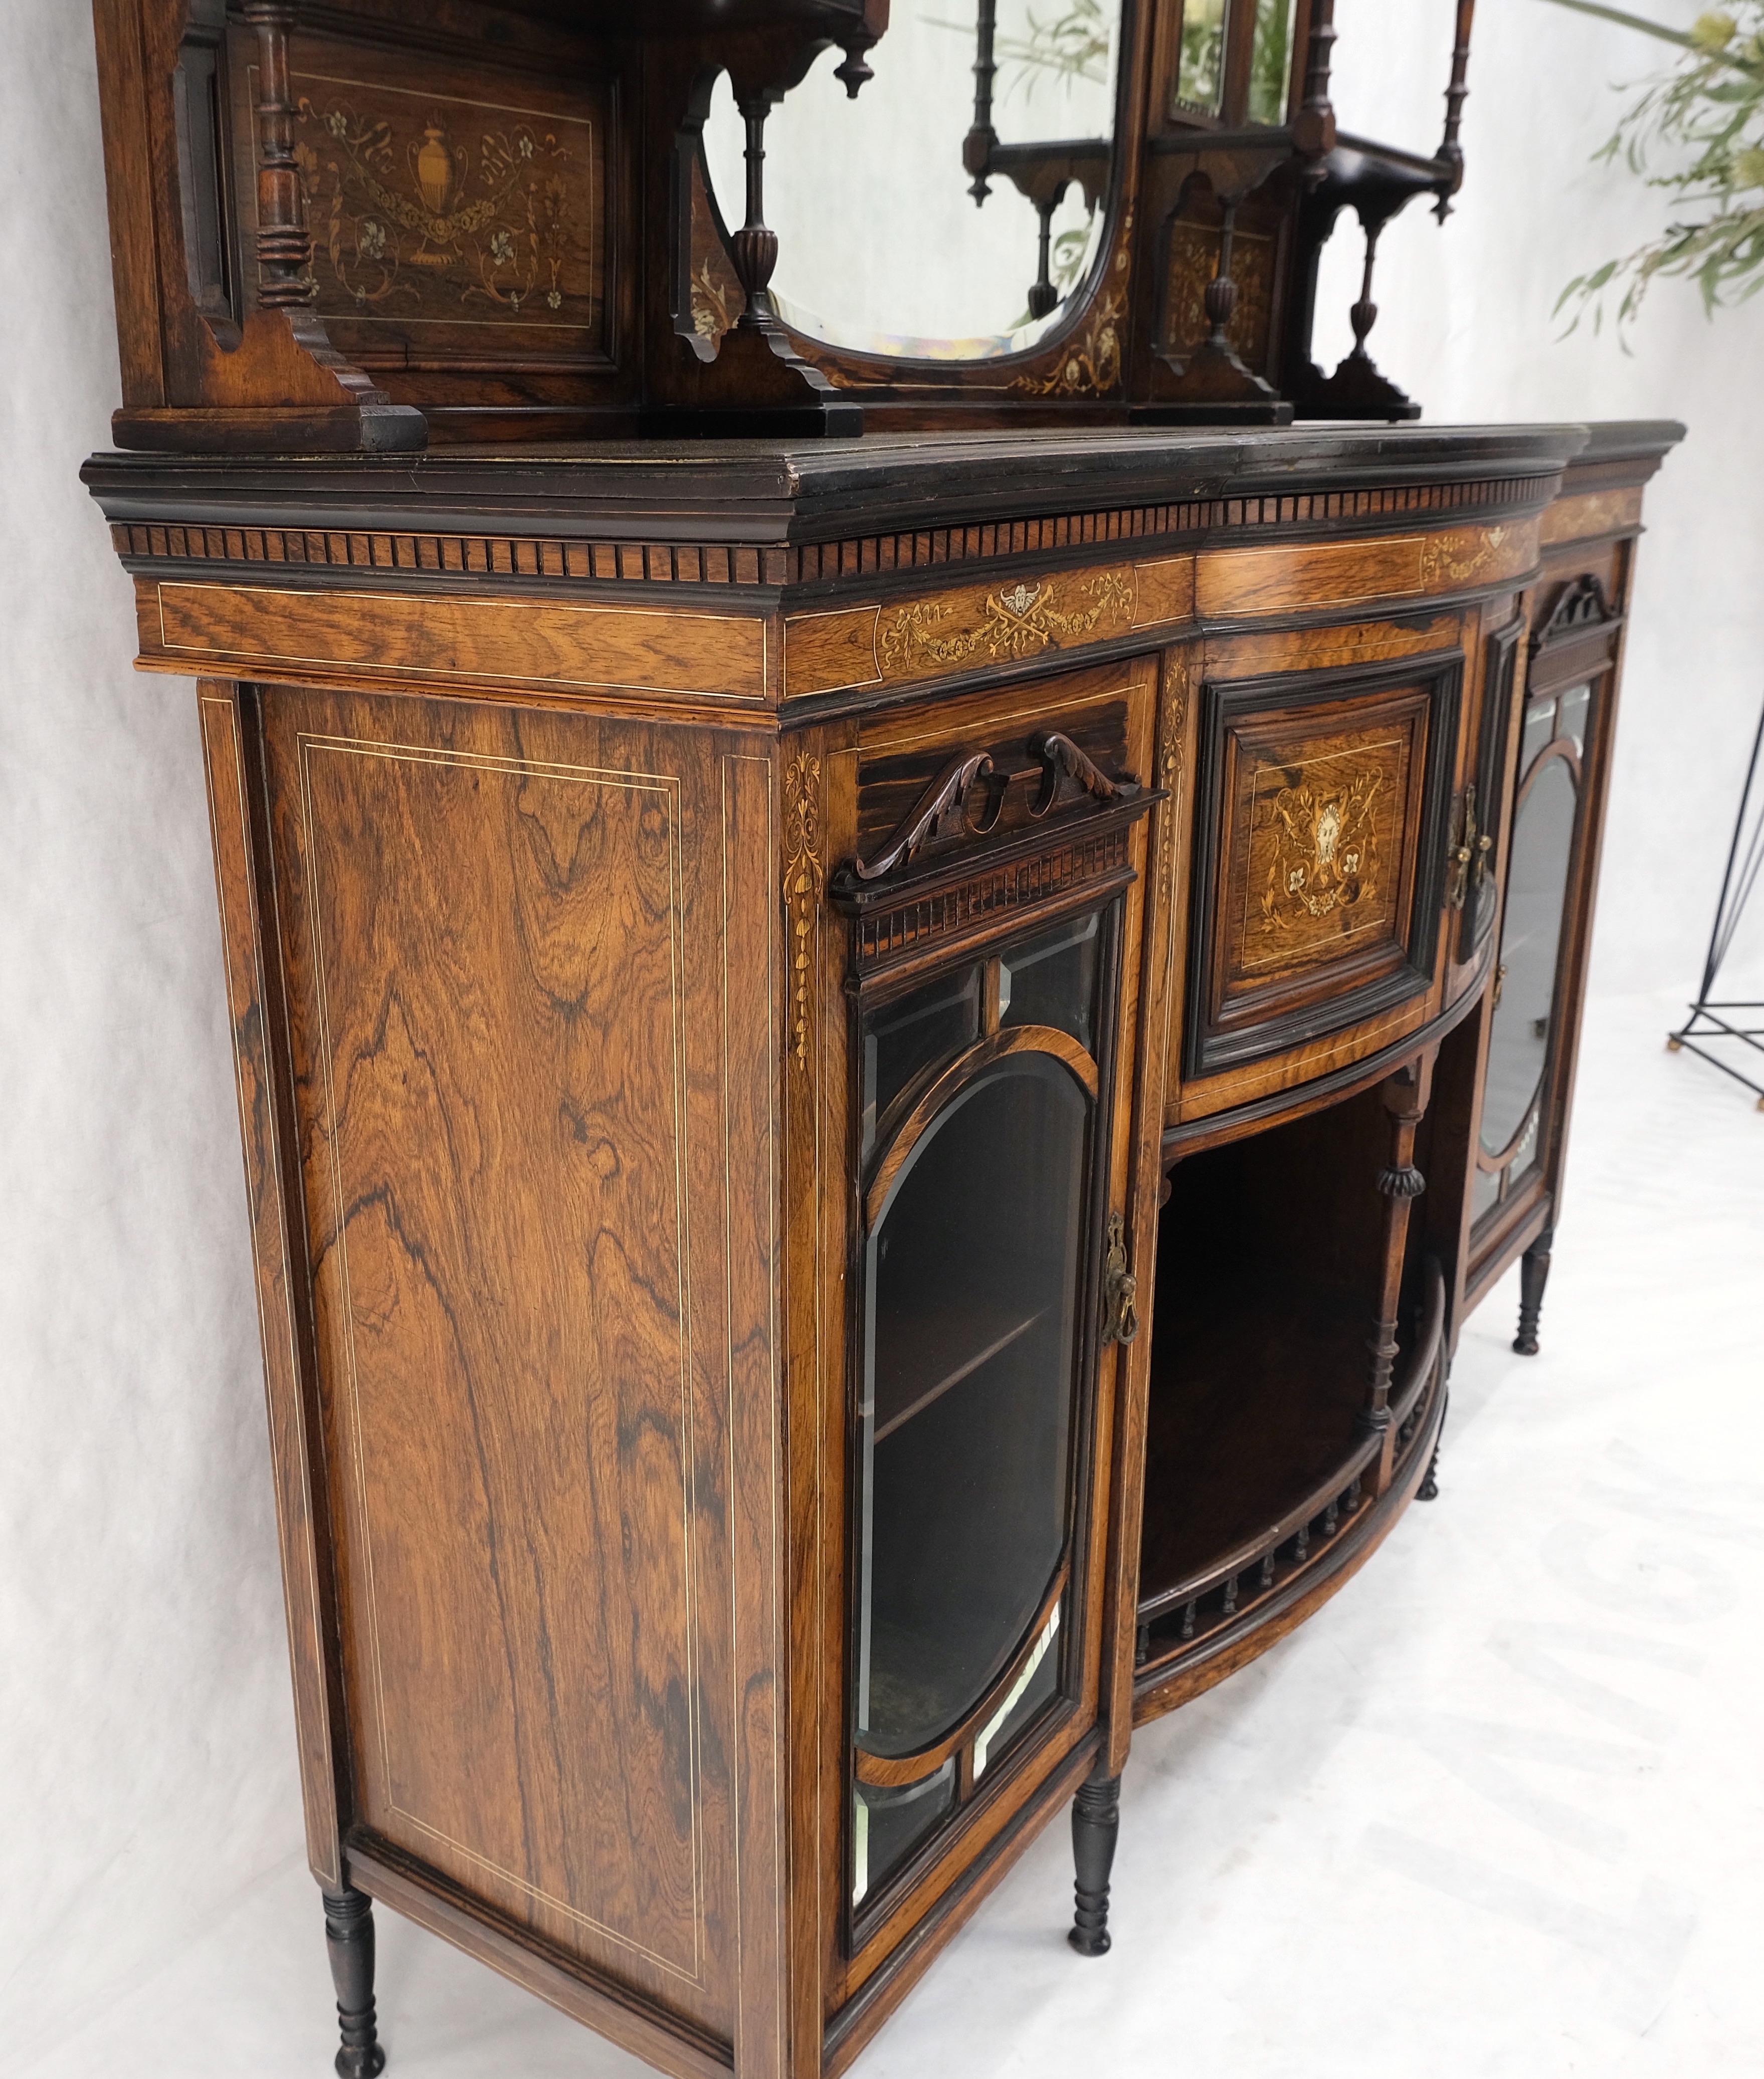 Victorian Rosewood Sideboard Credenza Etagere Display Cabinet Beveled Glass MINT.
Lots of fine carving and turned parts all complete. The two smaller side mirrors can be resilvered to make it perfect condition.